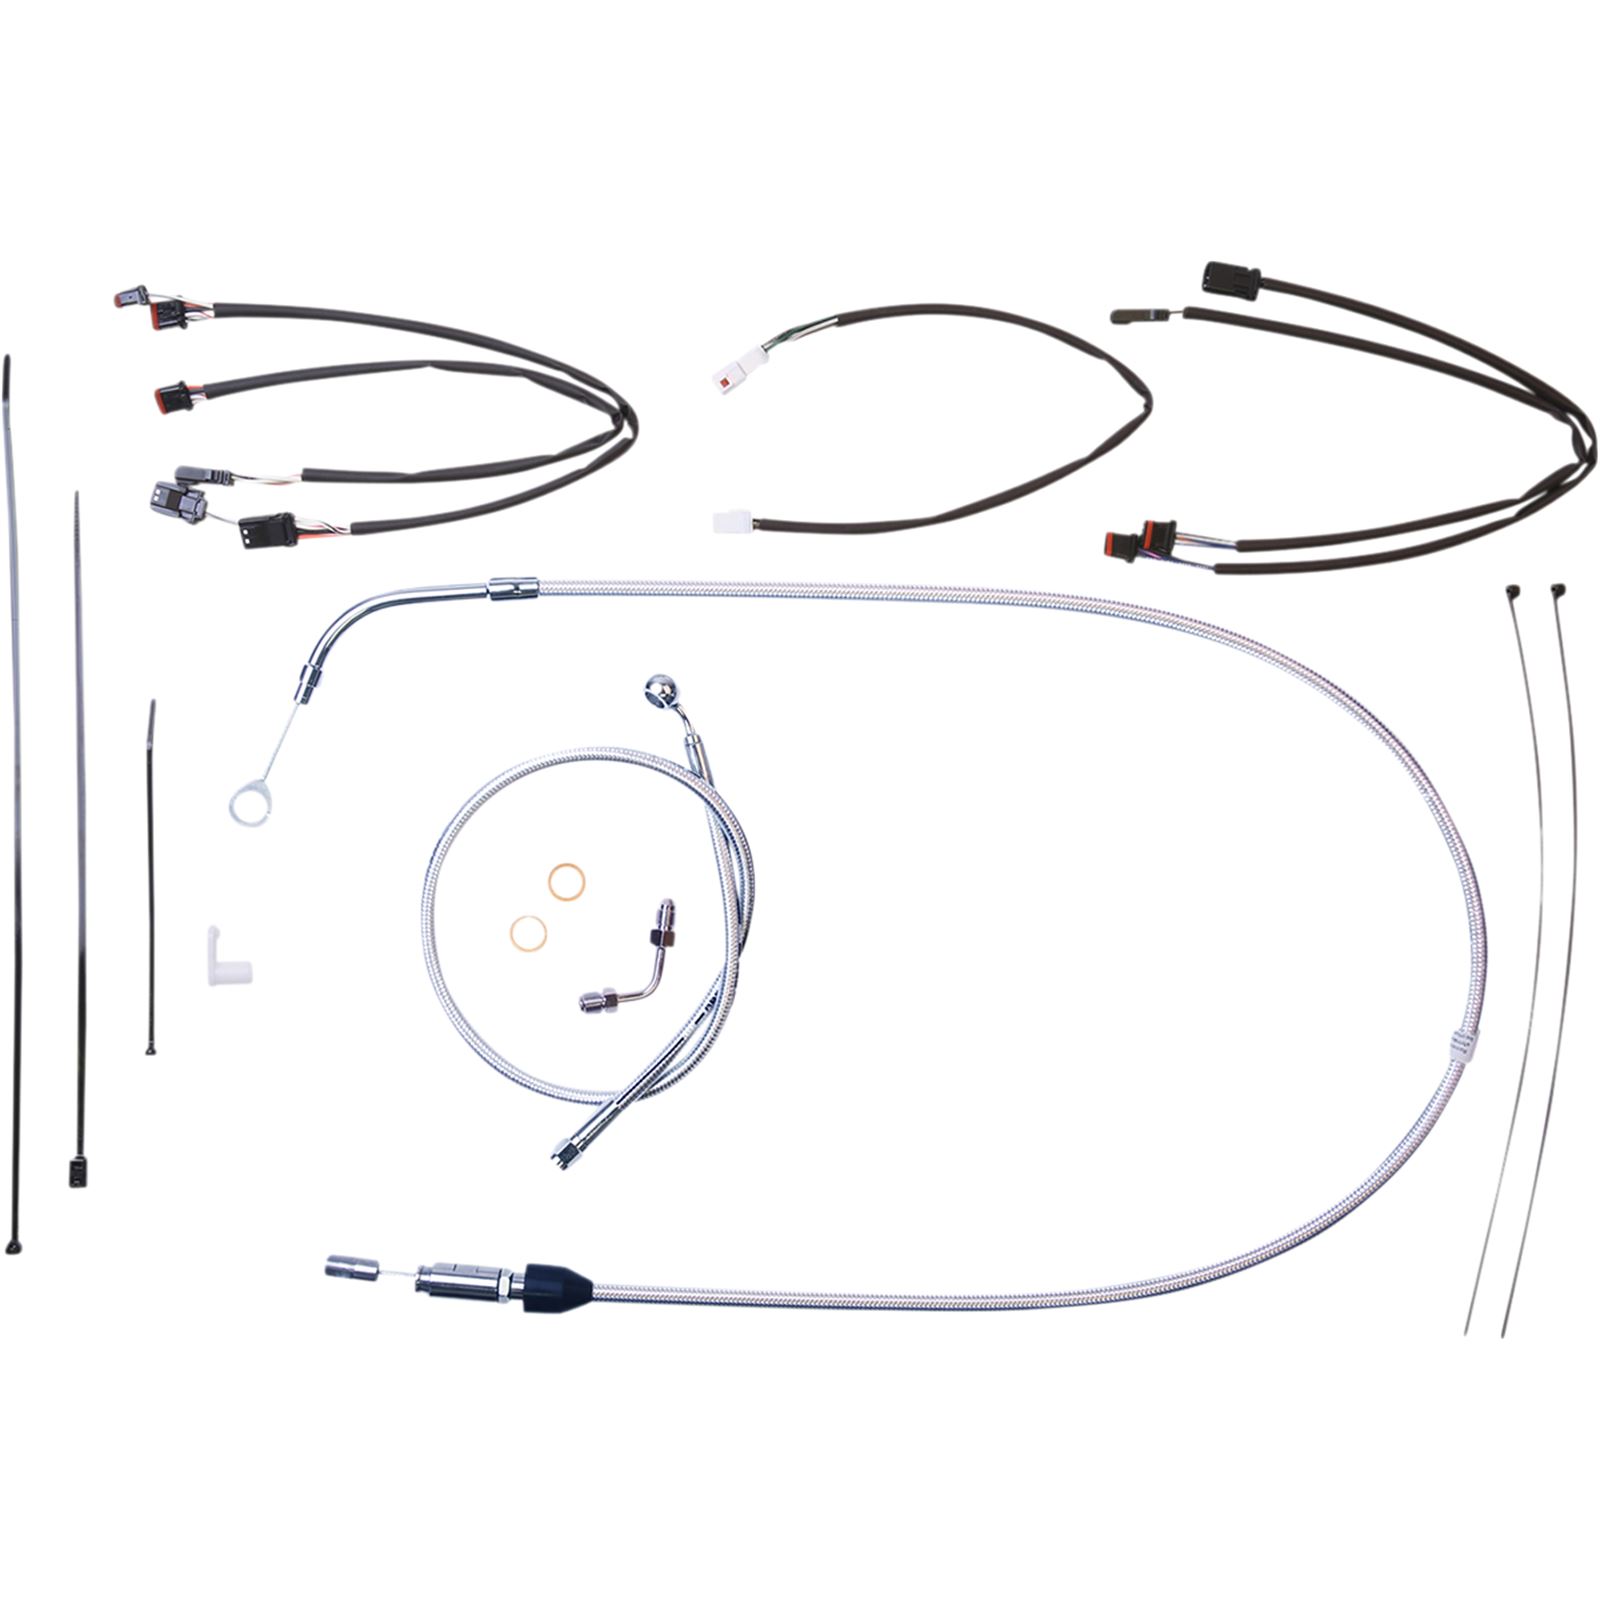 Magnum Control Cable Kit - Sterling Chromite II®